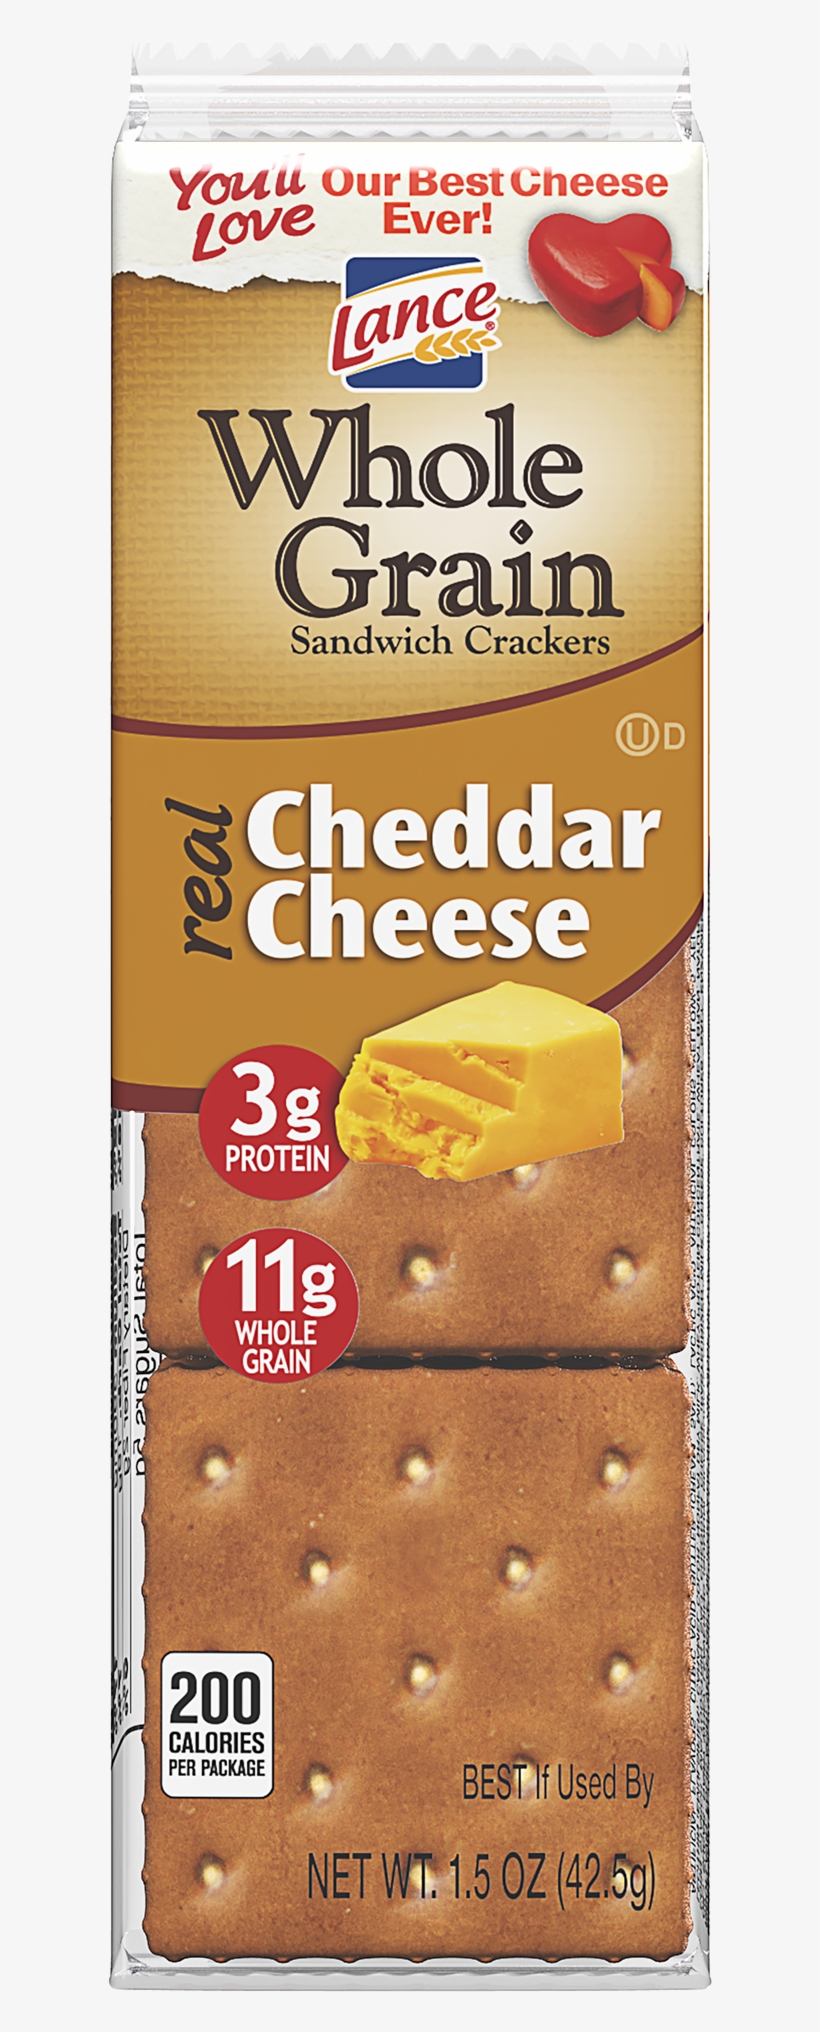 Lance Whole Grain Cheddar Cheese Sandwiches Cracker,, transparent png #7556666